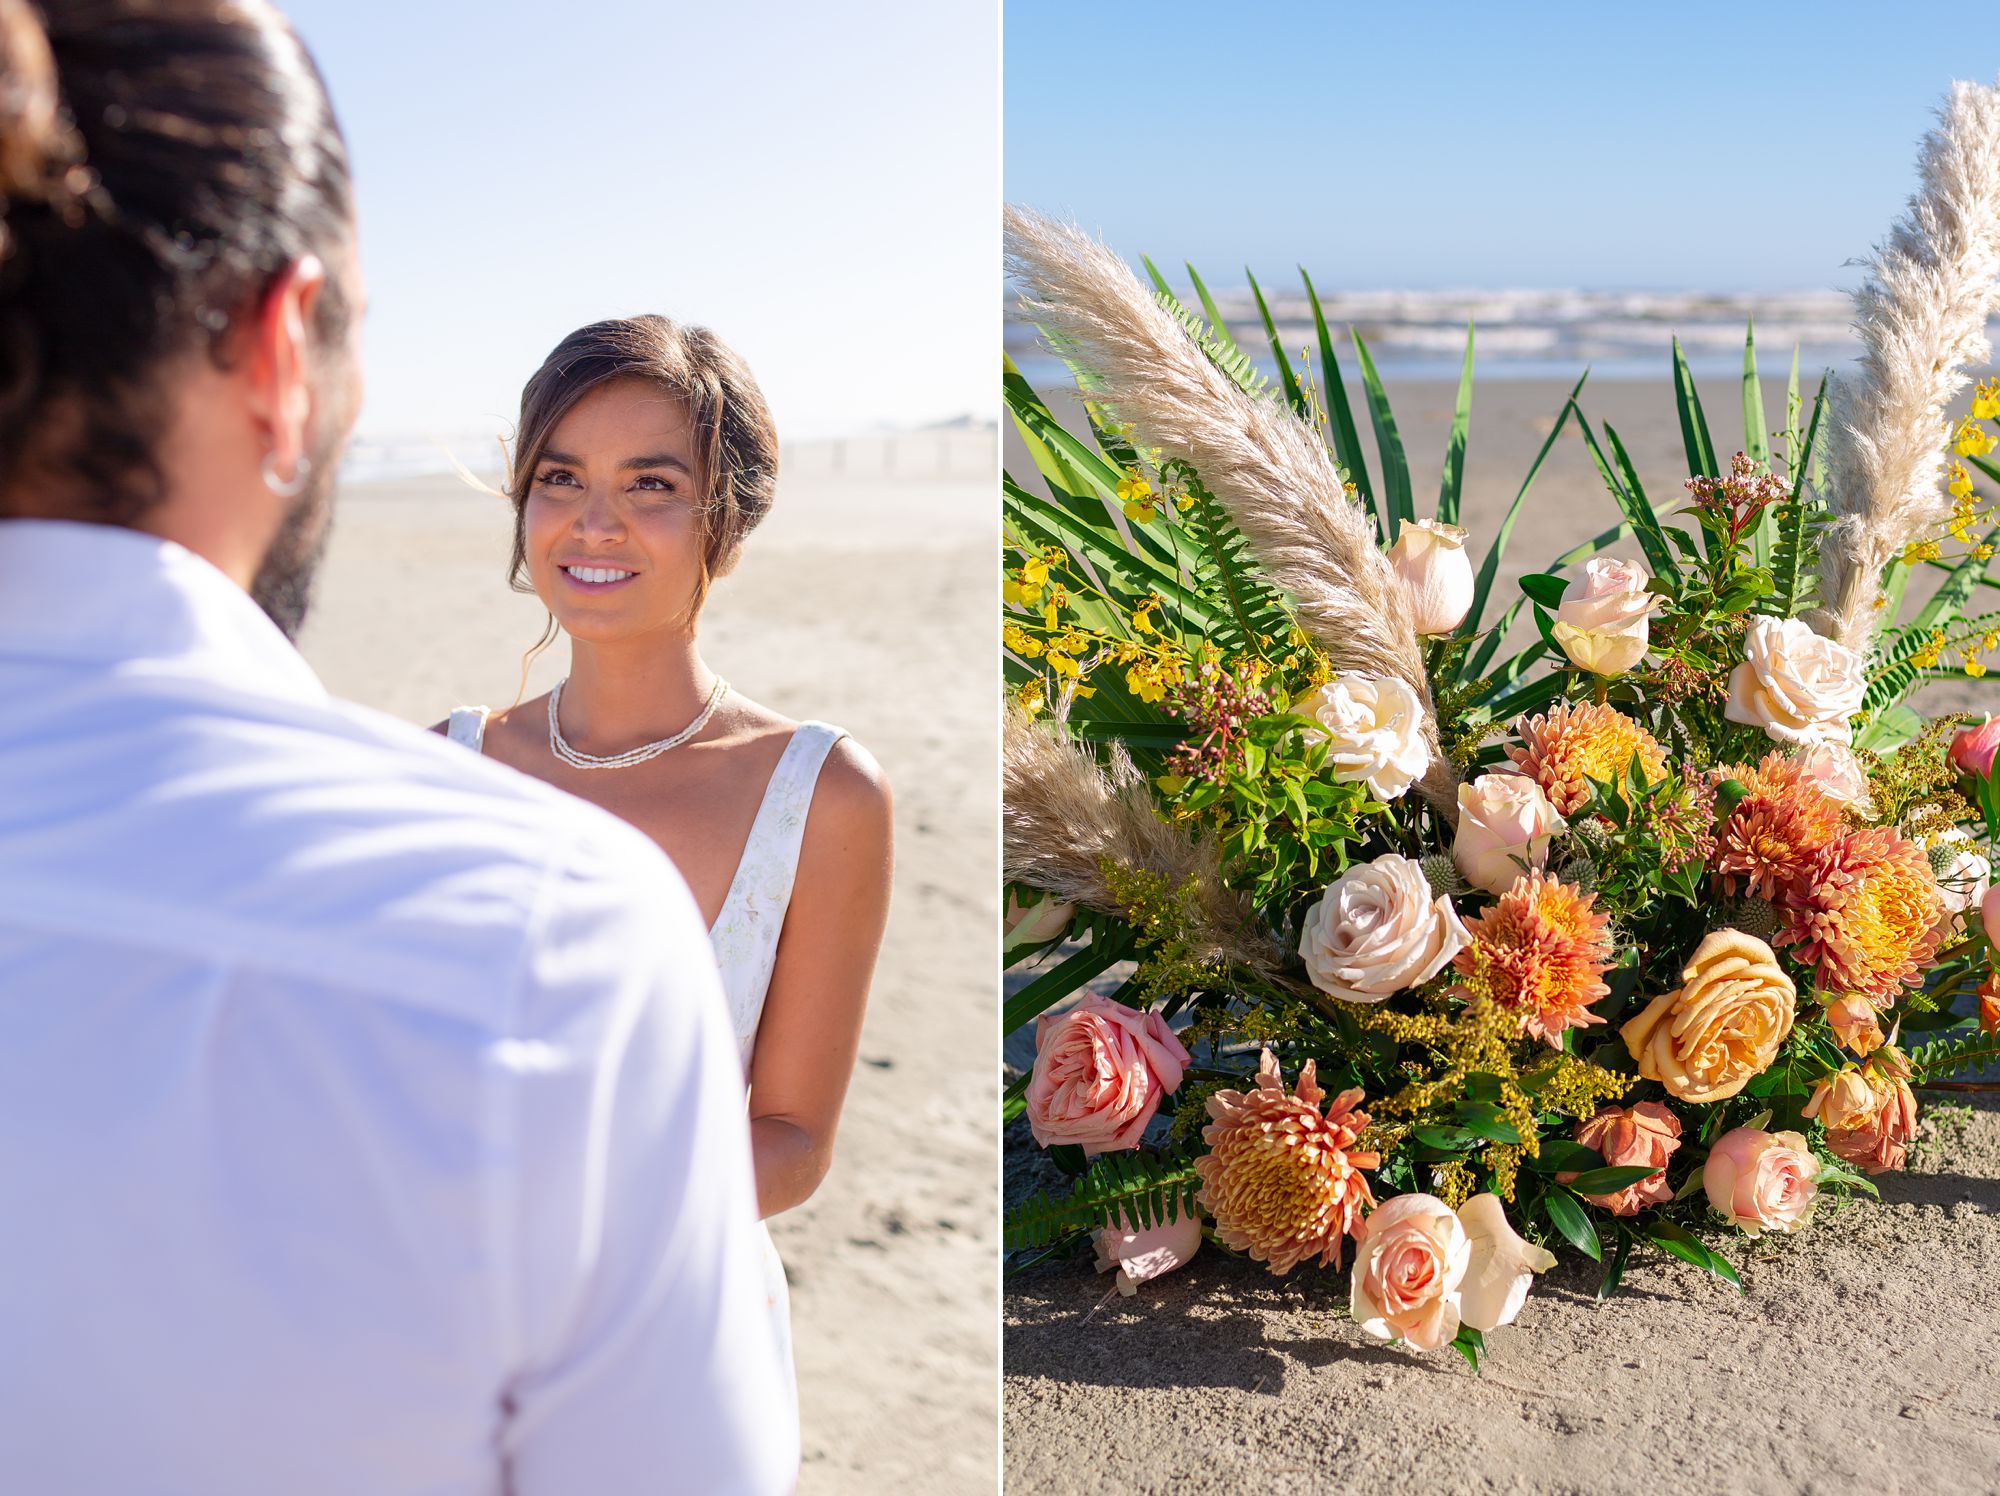 A bride and groom stand facing each other at their elopement ceremony; a large pink, orange and yellow flower arrangement with roses sits in the sand.